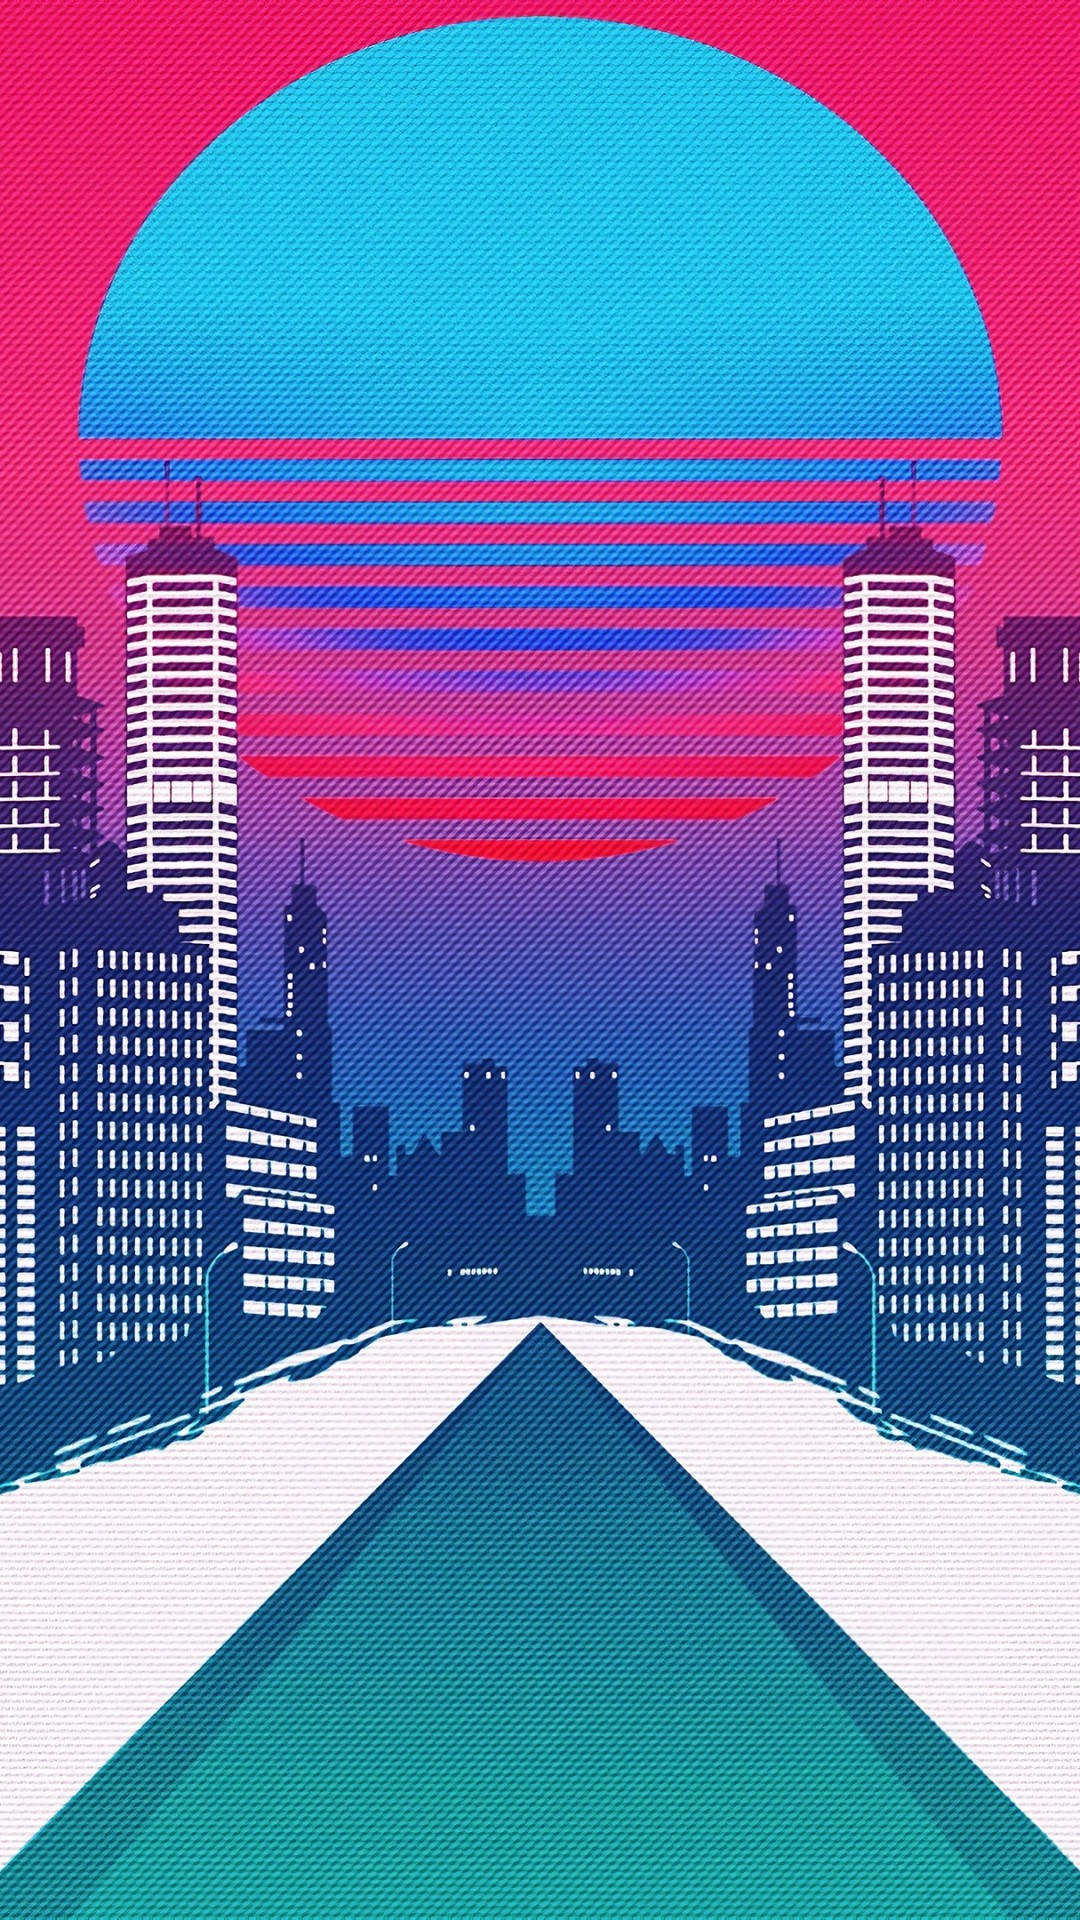 Vintage Iphone Retro Wave Tall Buildings Background